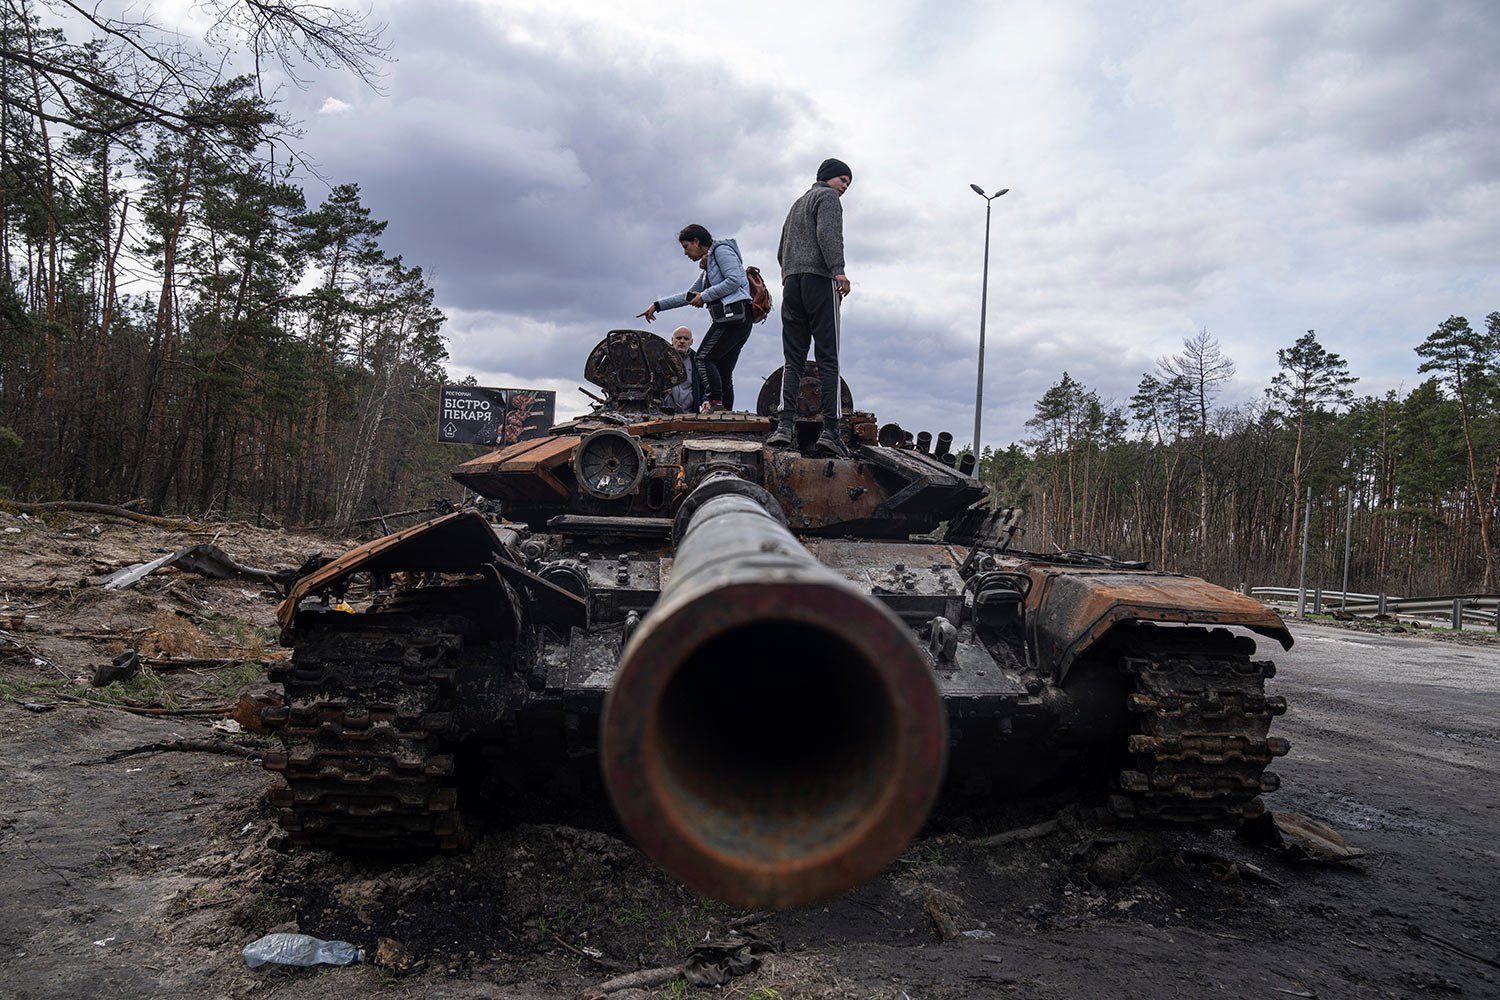  Local residents stand atop of a Russian tank damaged during fightings between Russian and Ukrainian forces in the outskirts of Kyiv, Ukraine, Monday, April 11, 2022. (AP Photo/Evgeniy Maloletka) 